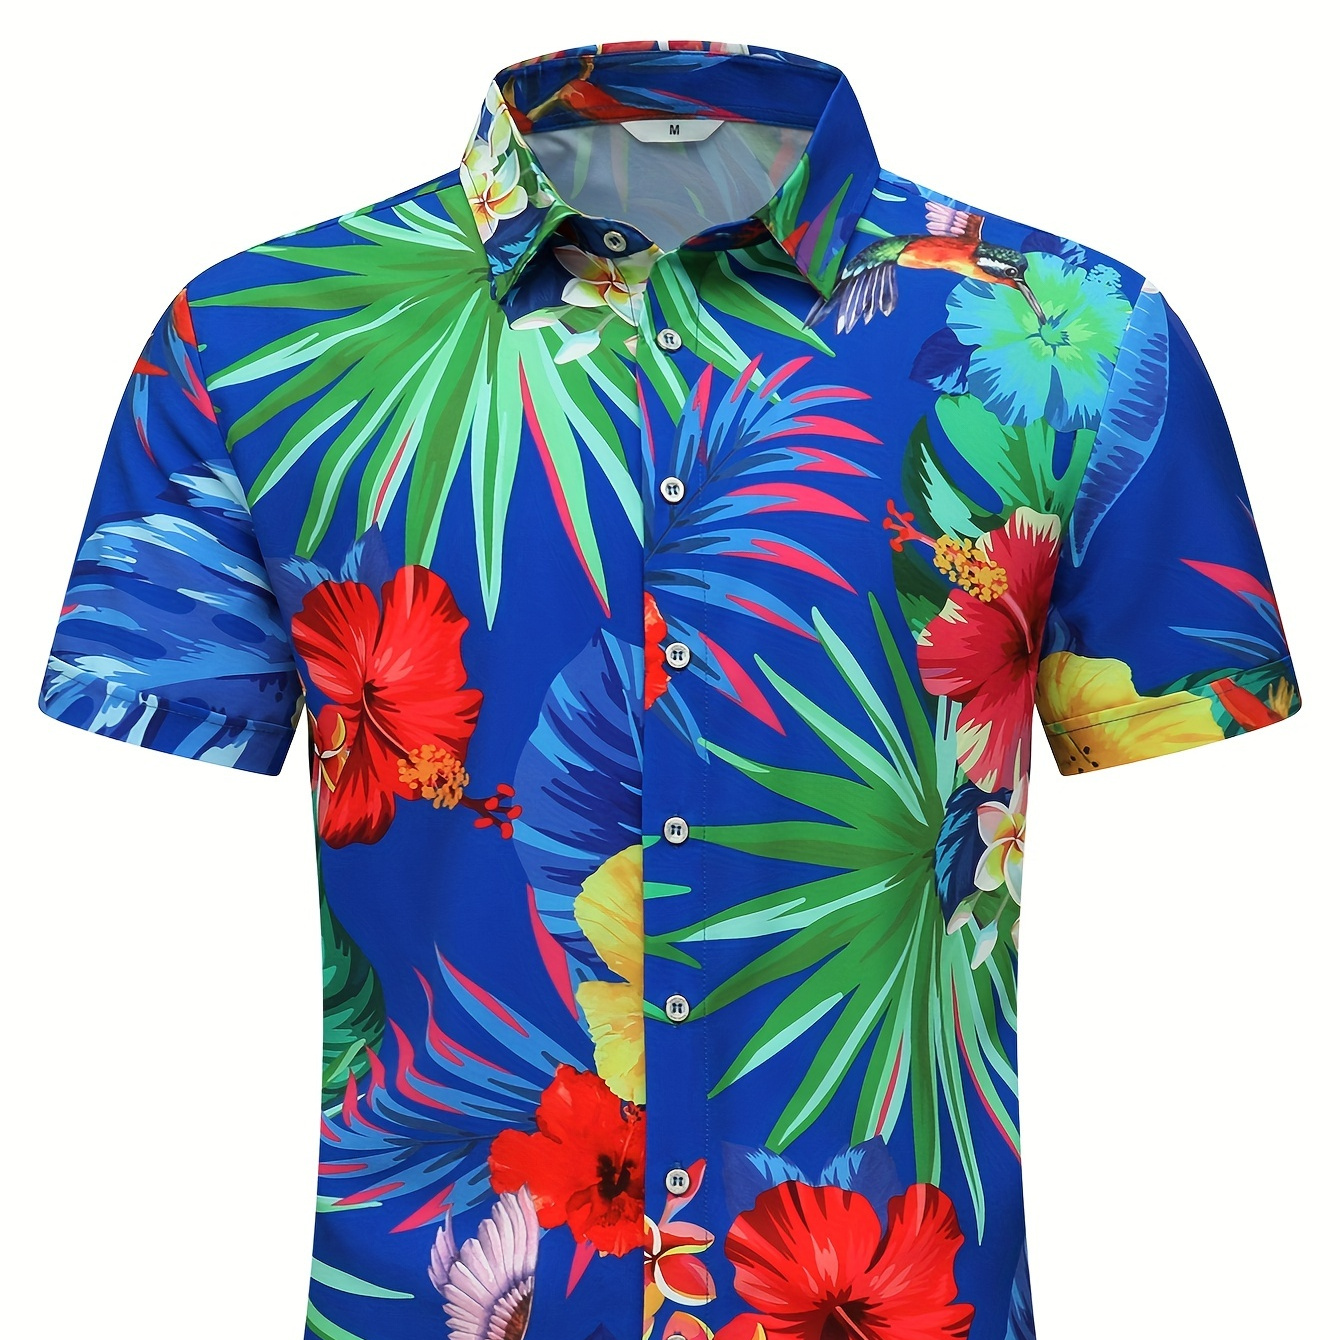 

Men's Casual Hawaiian Button-up Lapel Collar Short Sleeve Shirt With Fancy Floral Print, Perfect For Summer Vacation